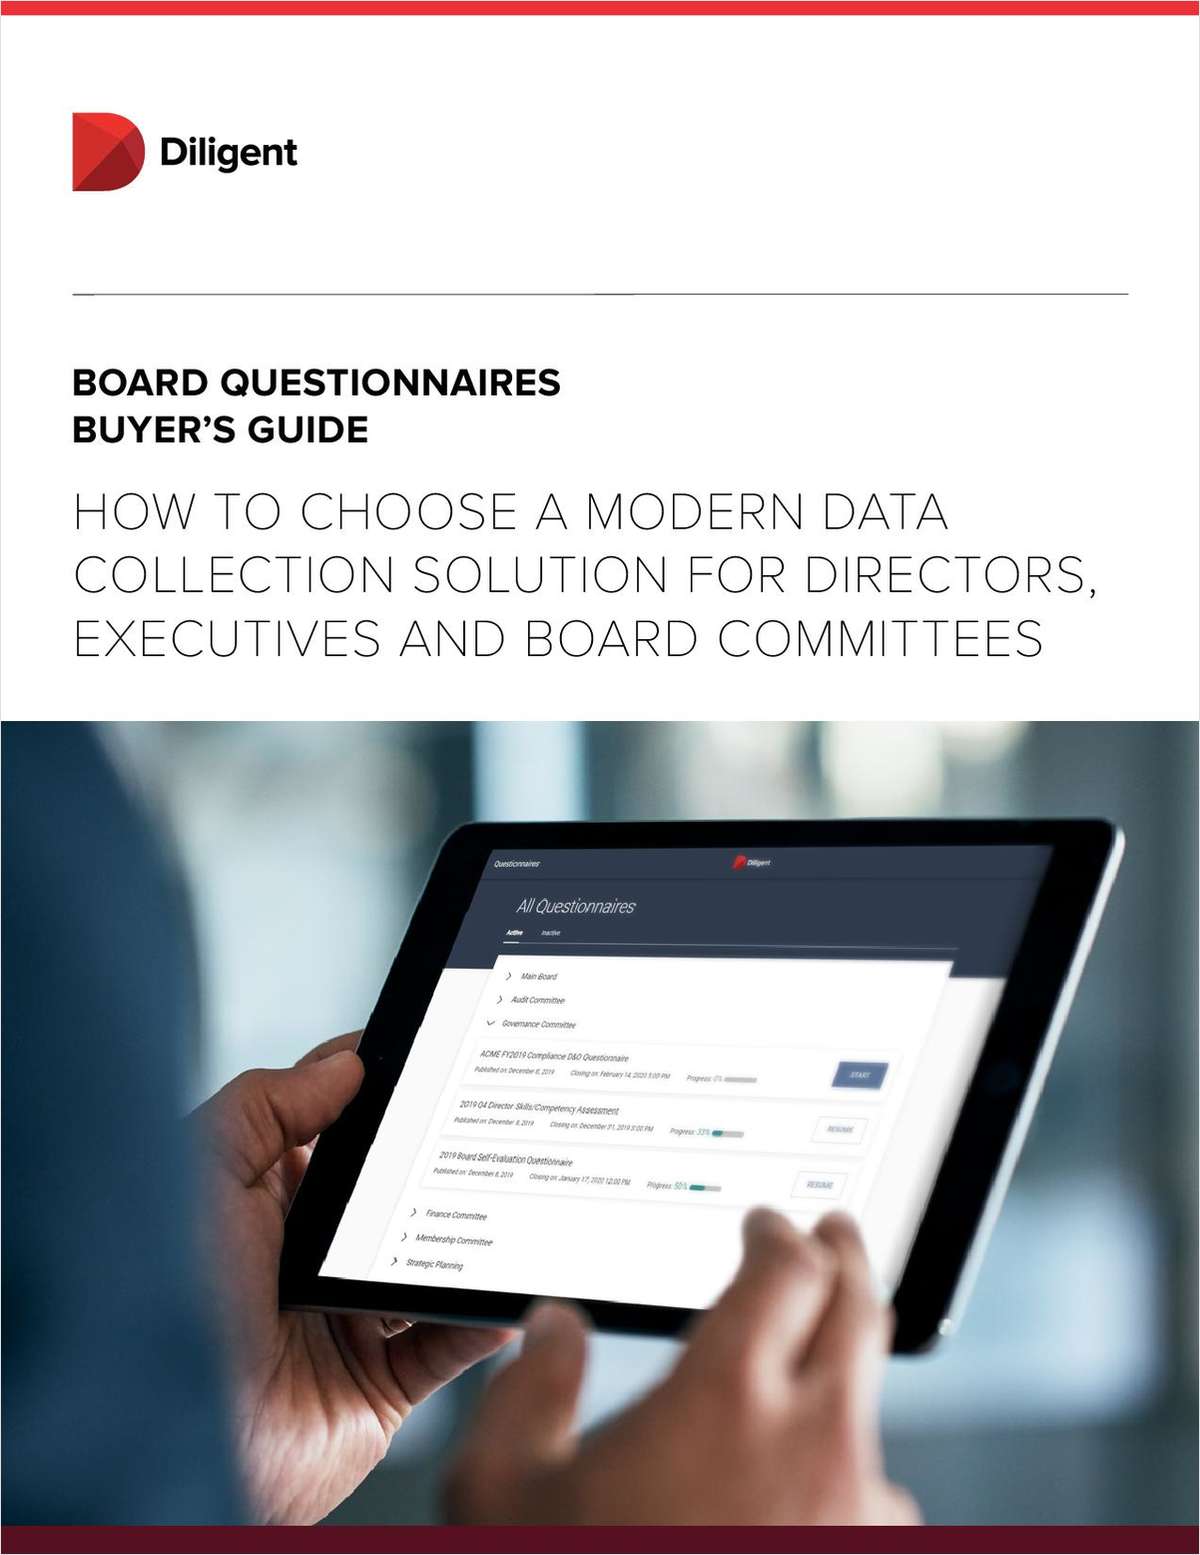 Board Questionnaires Buyer's Guide